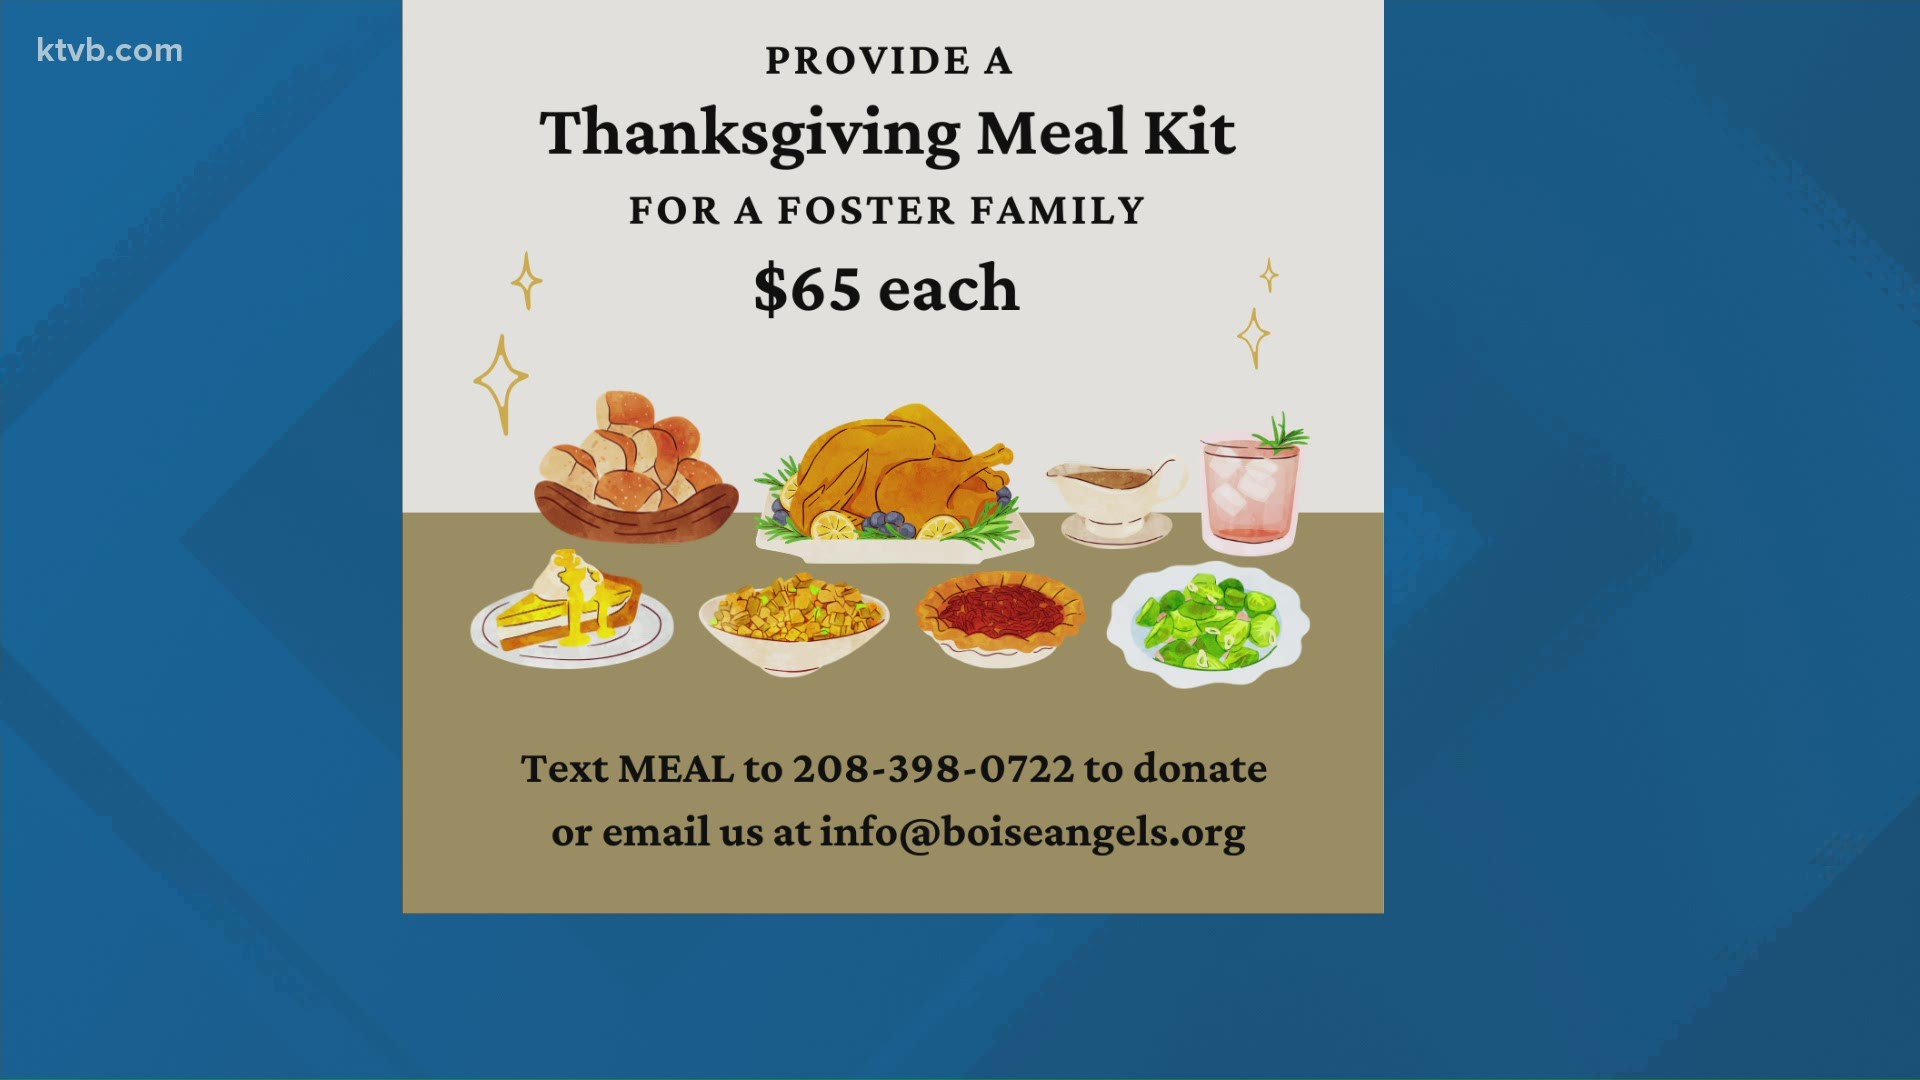 Plus, how to help families in need get a Thanksgiving meal.